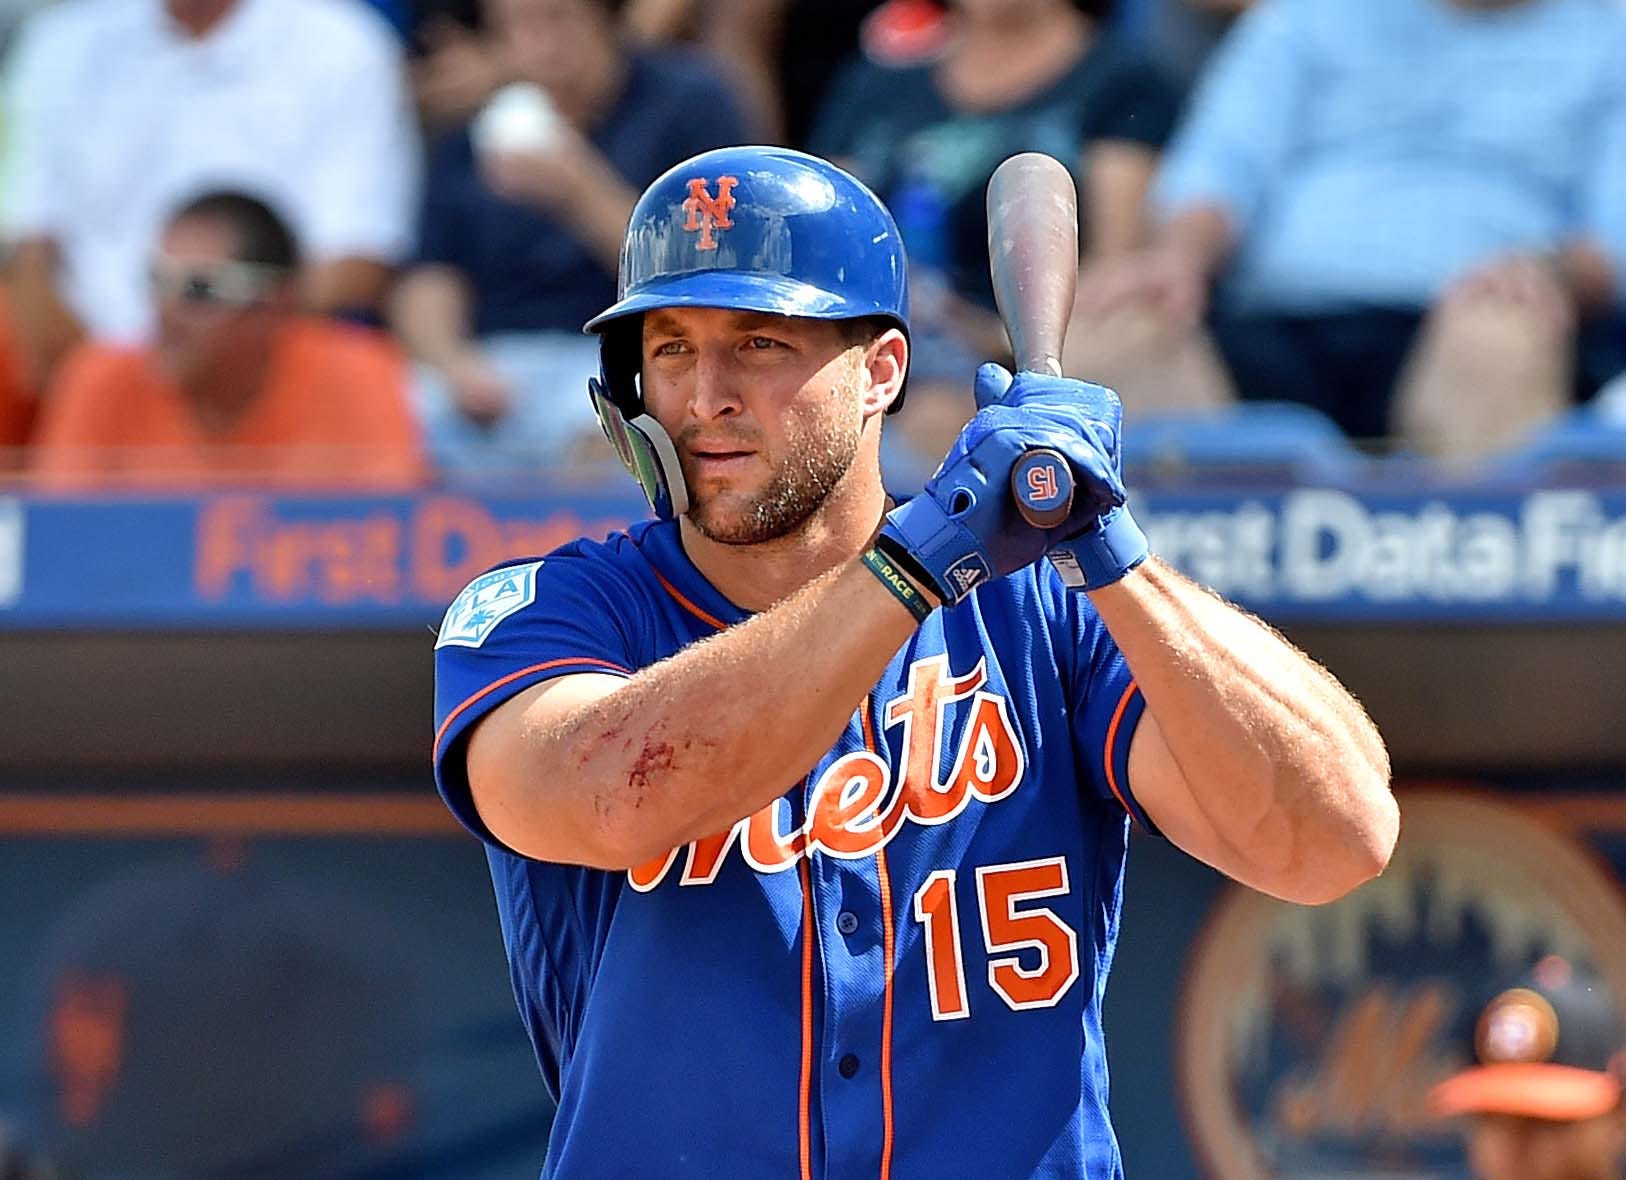 Tim Tebow is expected to return Mets in 2021, says team